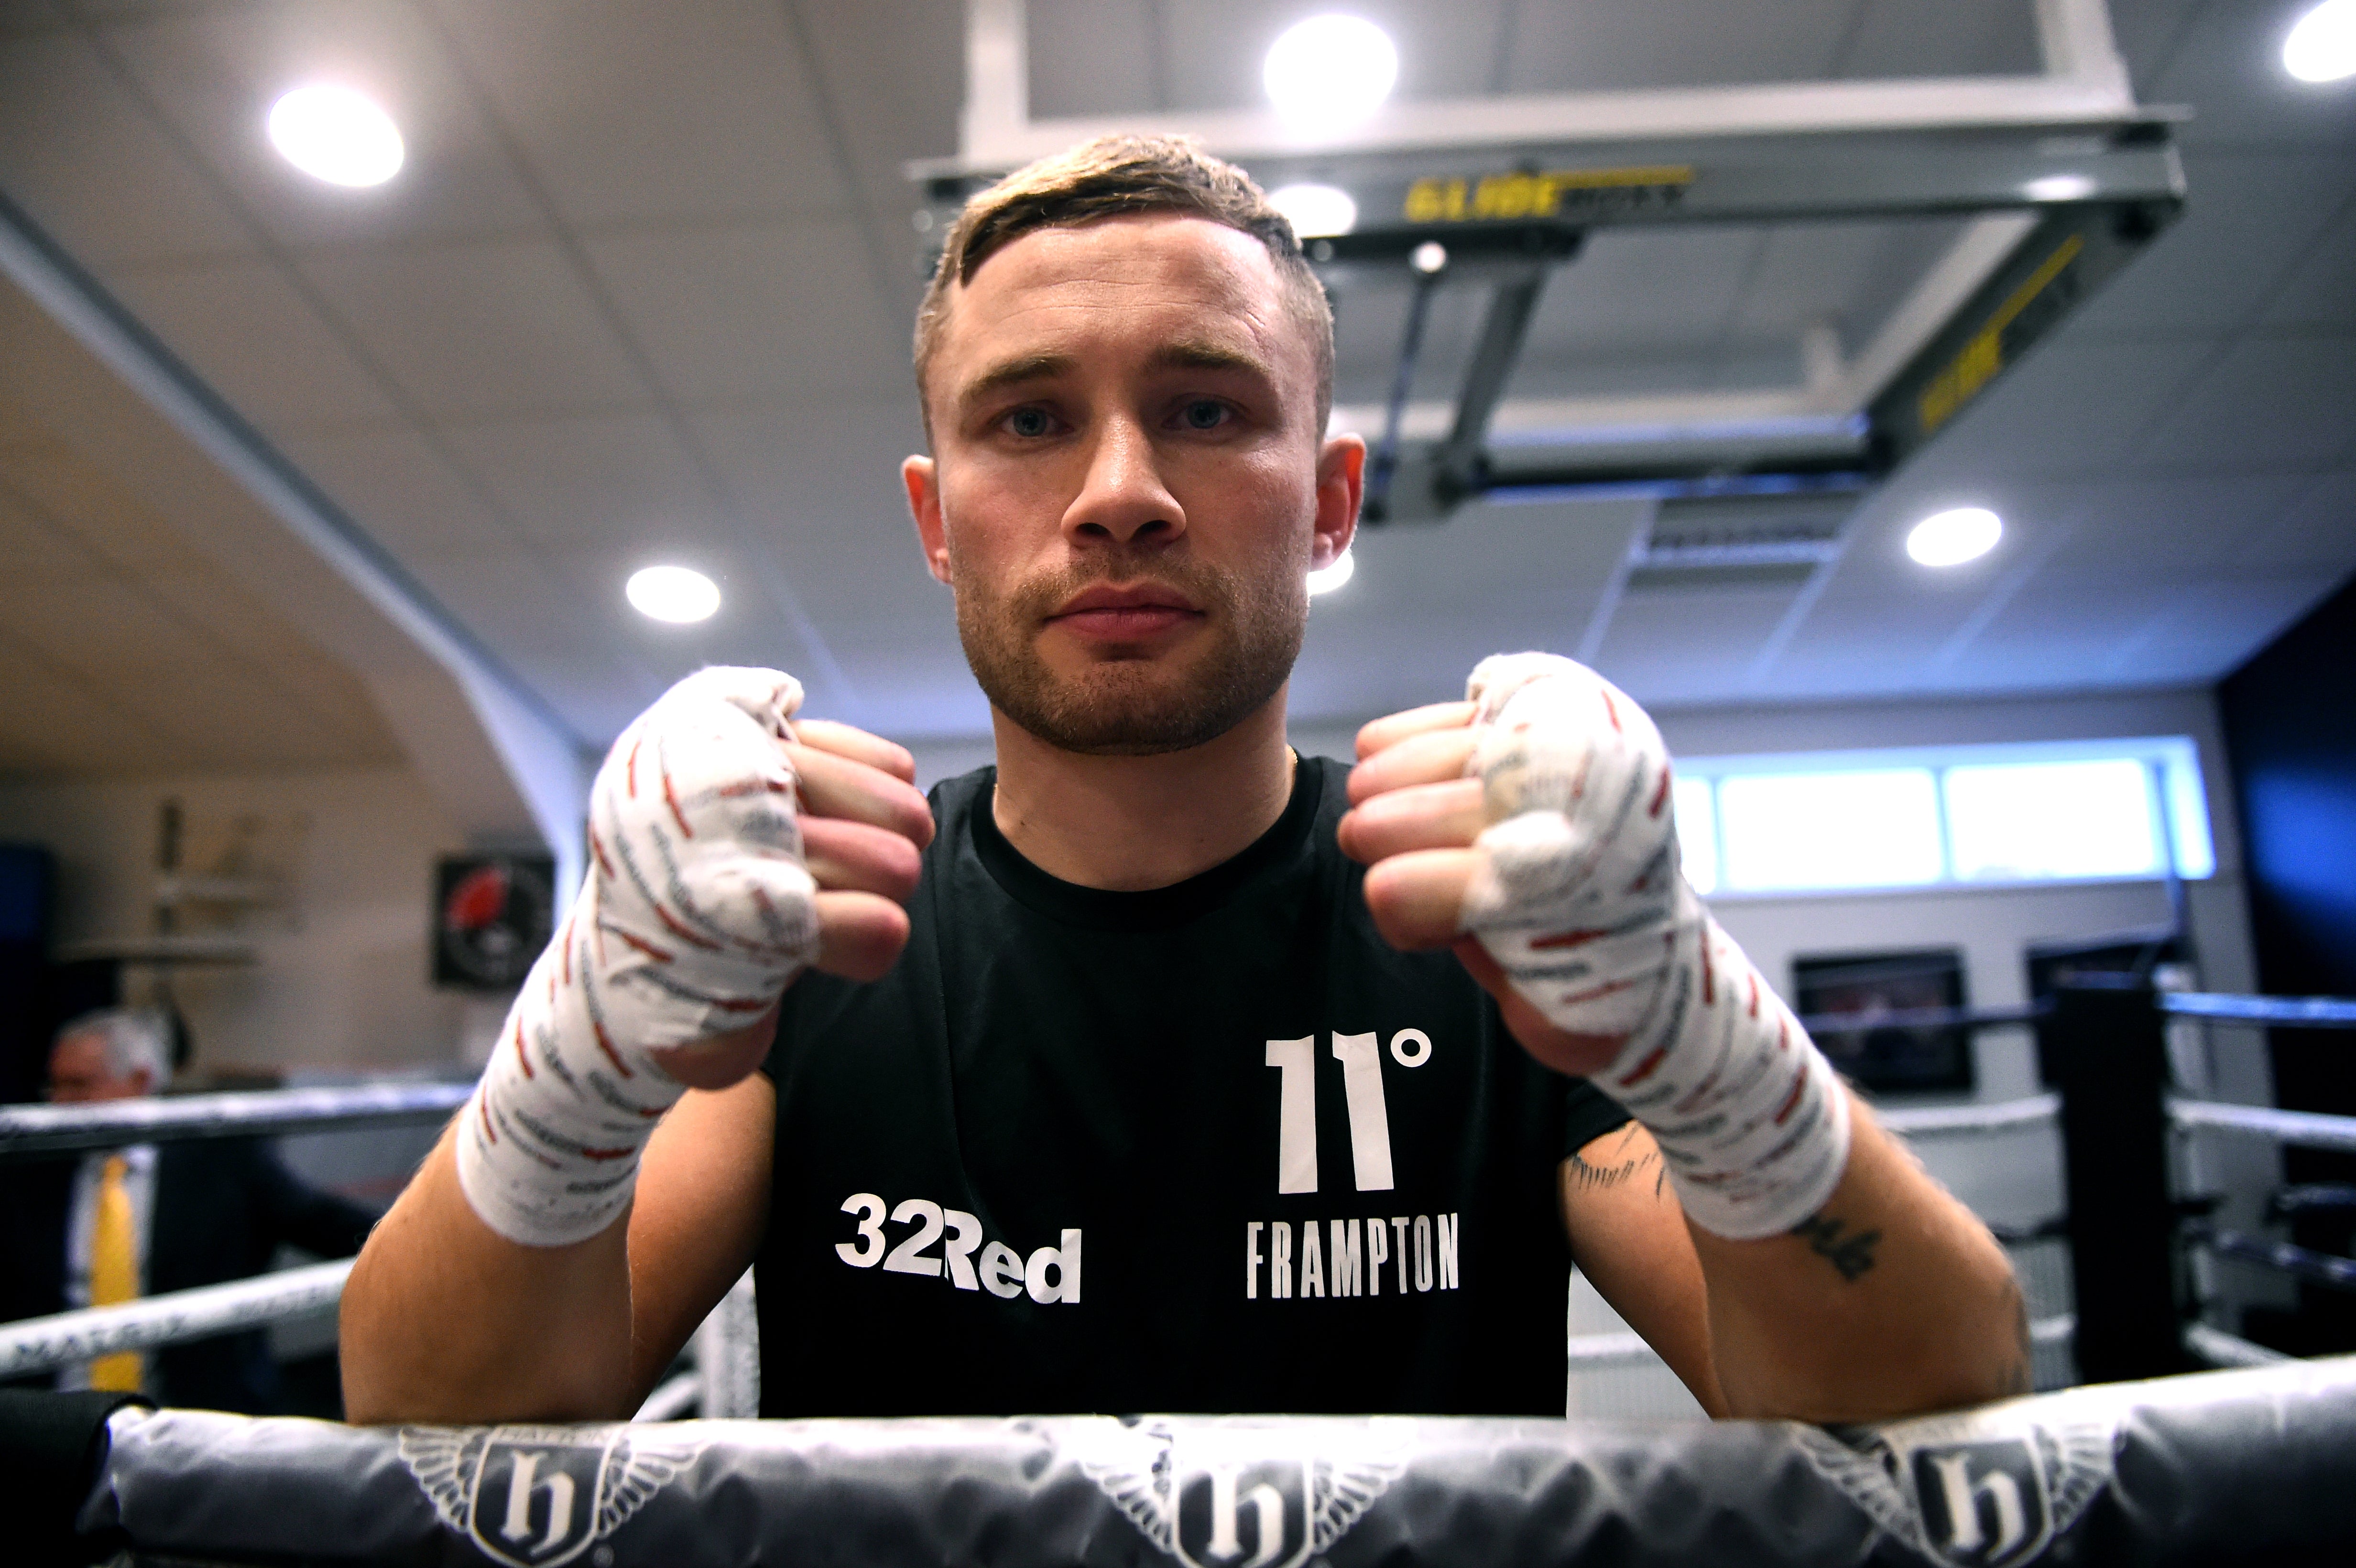 Frampton vs Herring live stream How to watch fight online and on TV The Independent